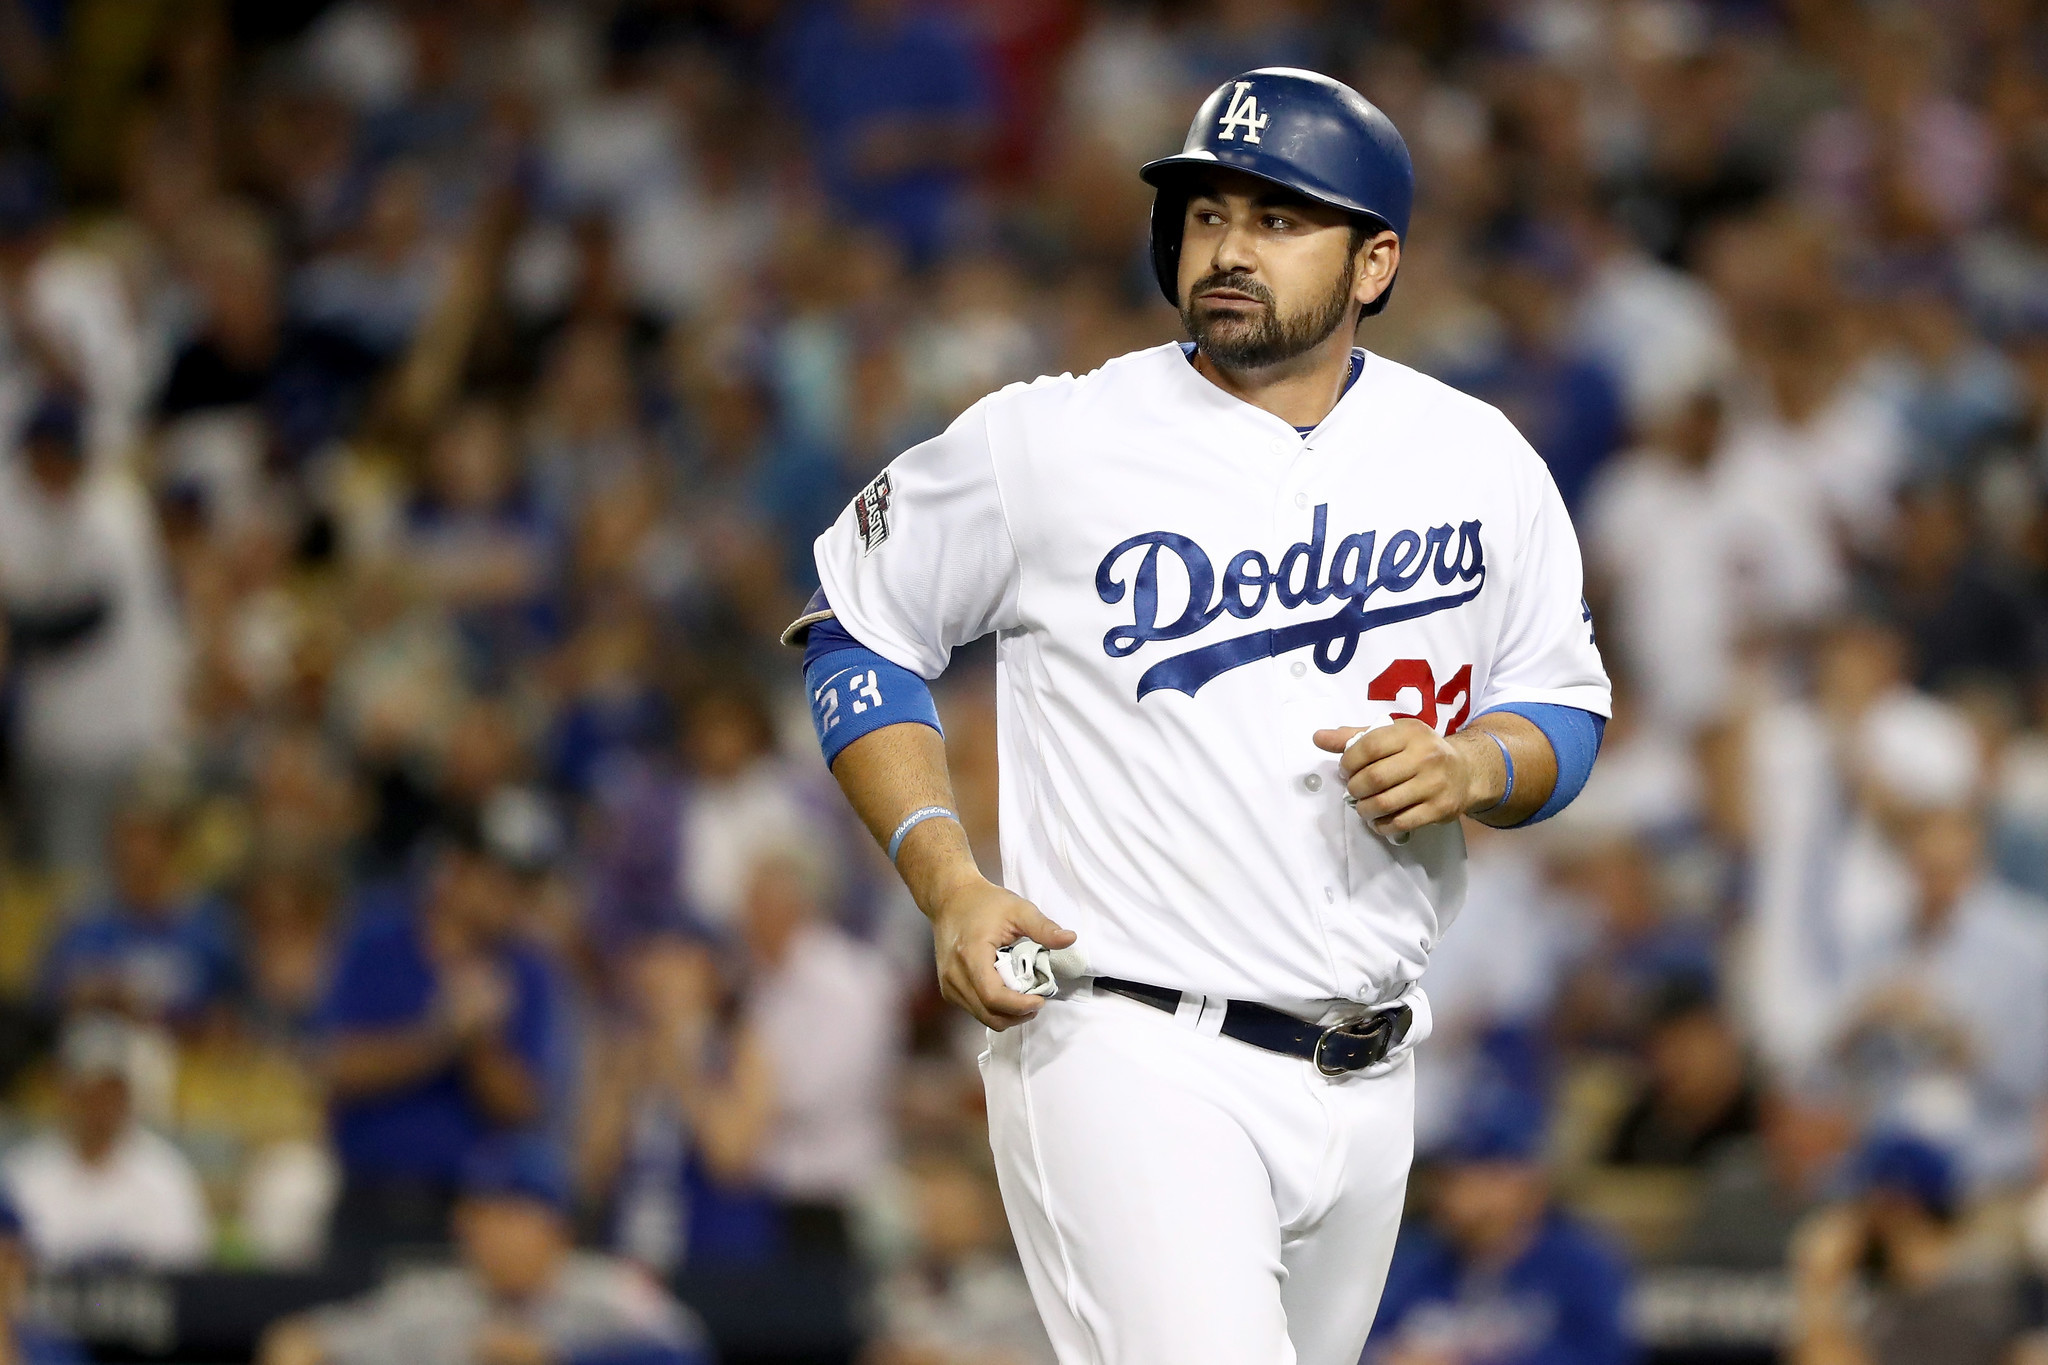 A challenge to Cubs fans? Adrian Gonzalez says Wrigley won’t get any louder